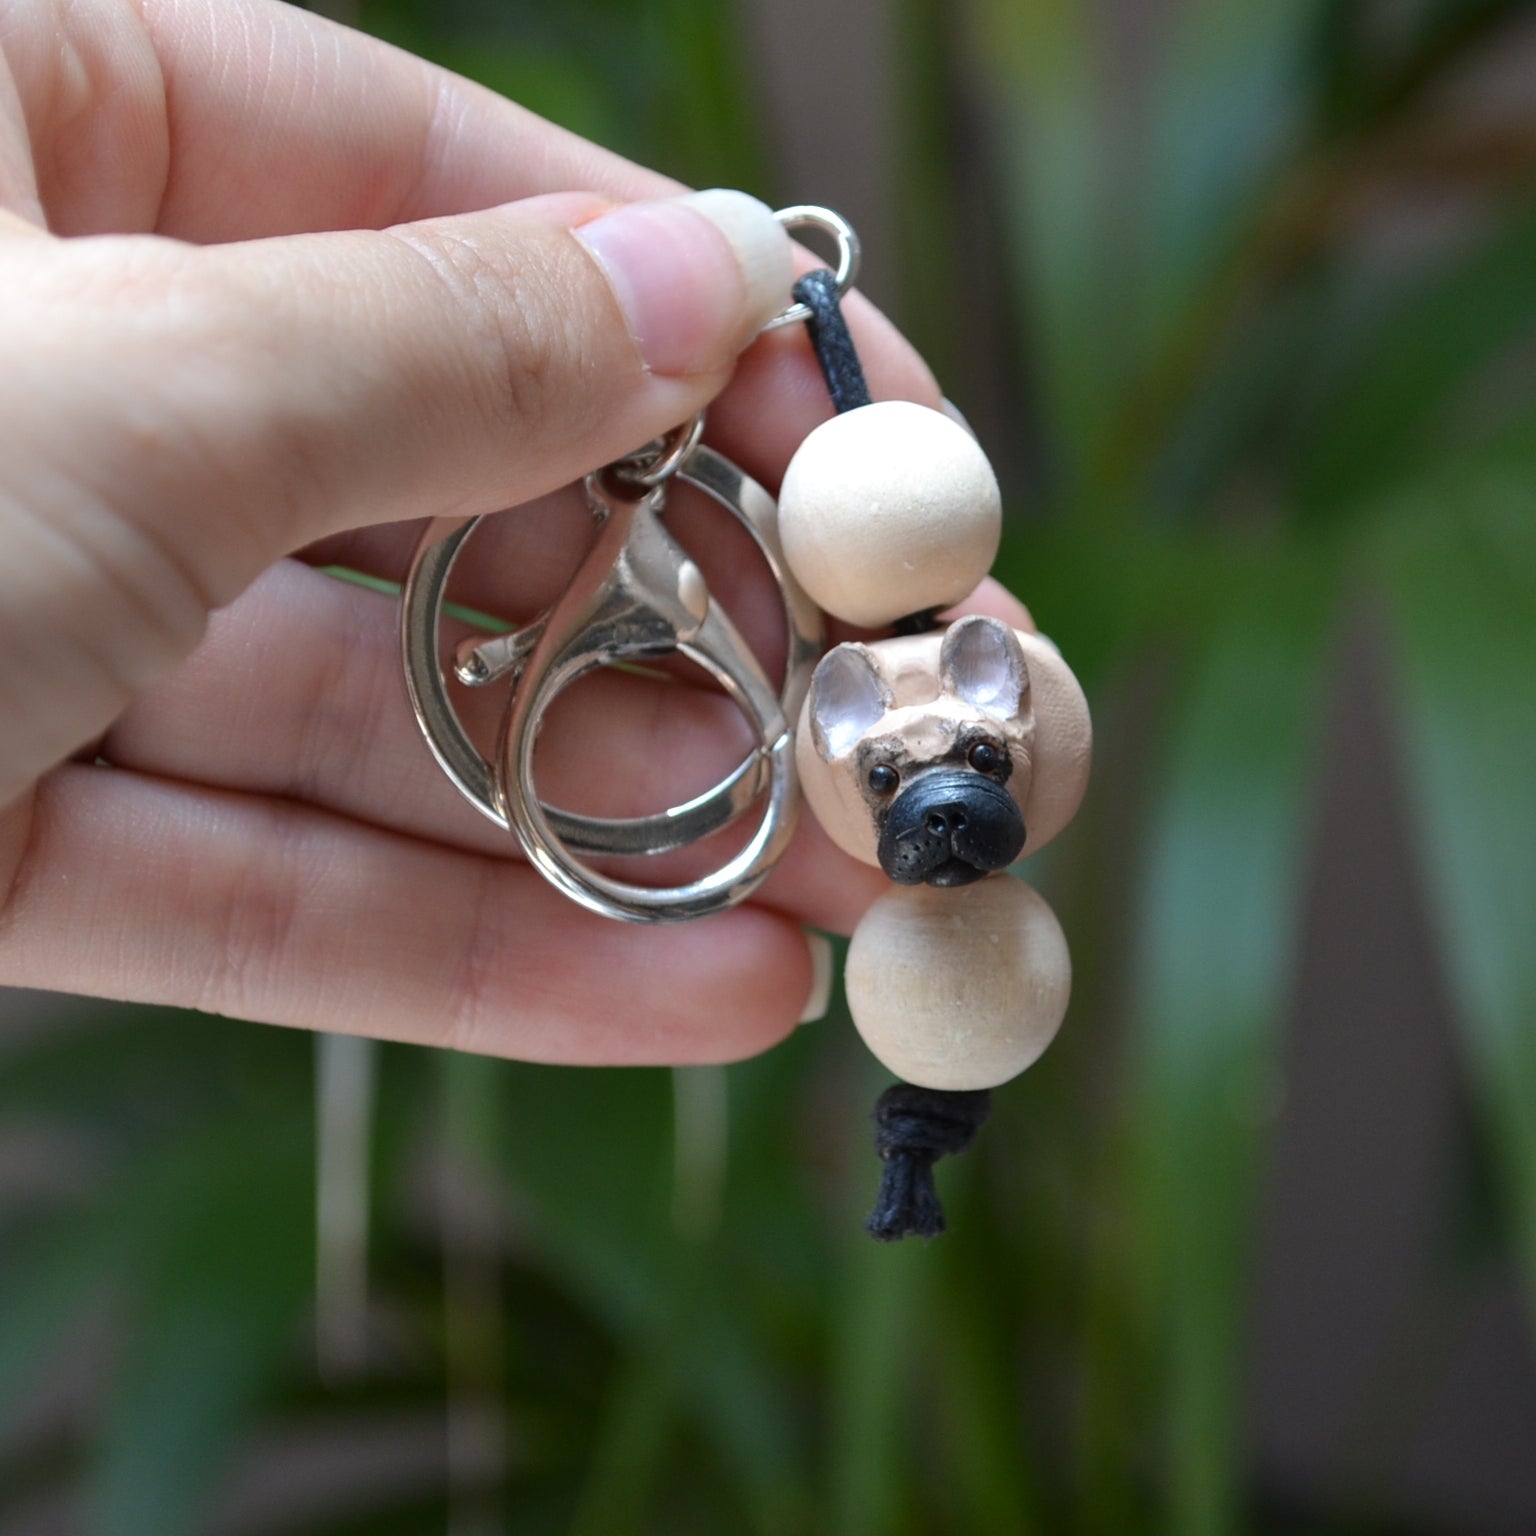 Handmade timber and polymer clay french bulldog keychain being held in front of green palm plant background